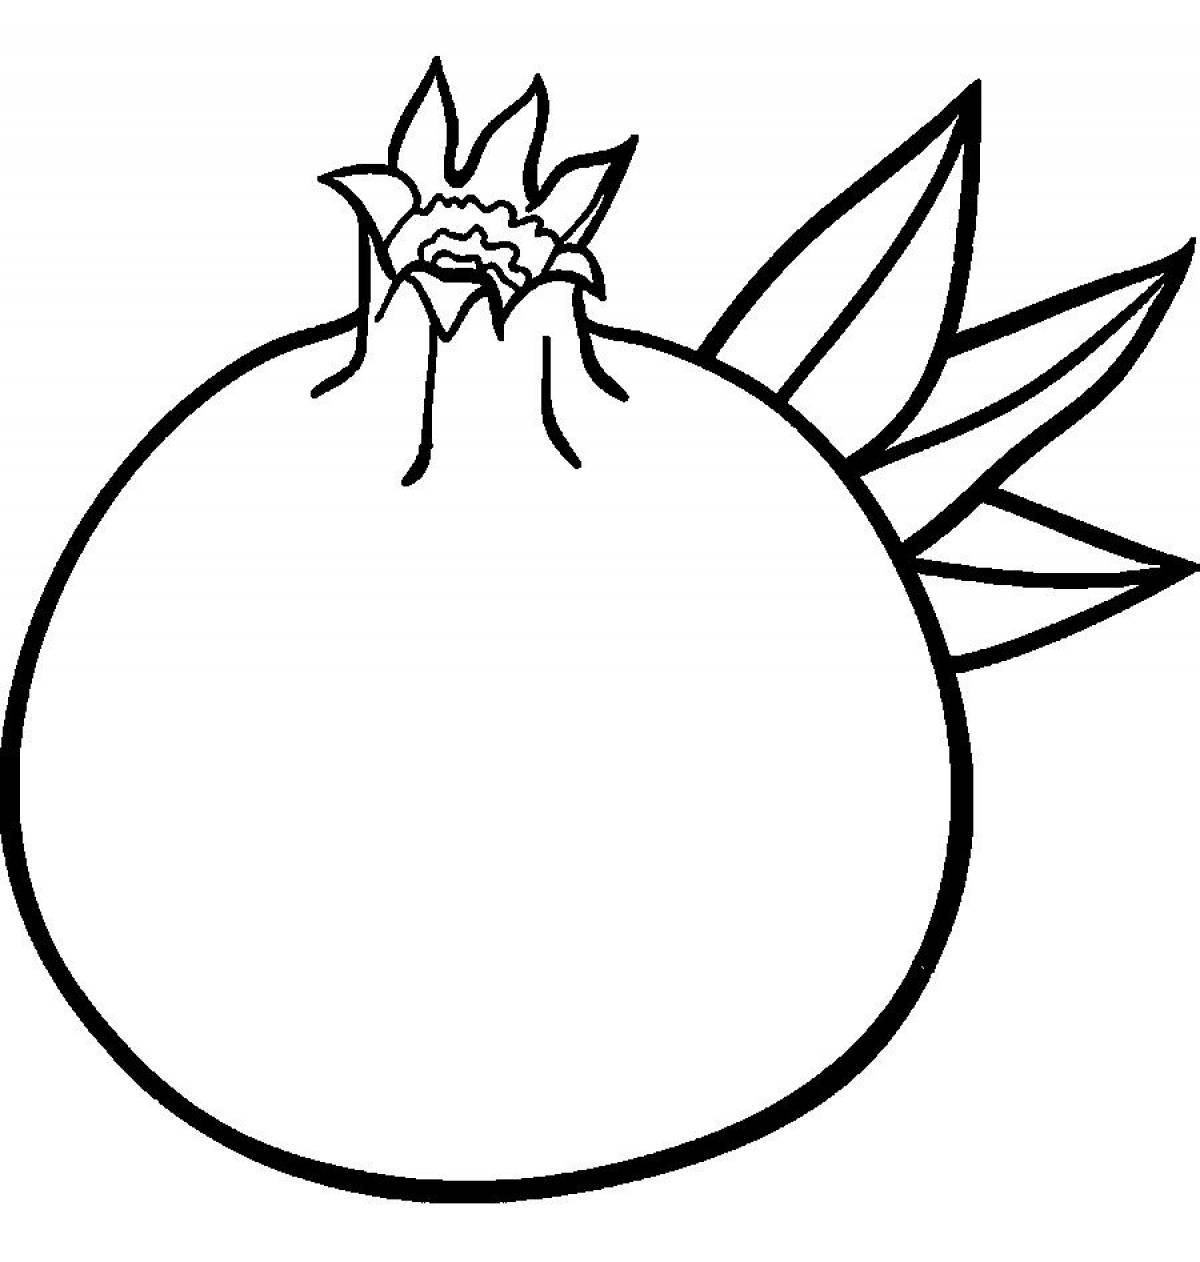 Pomegranate coloring page